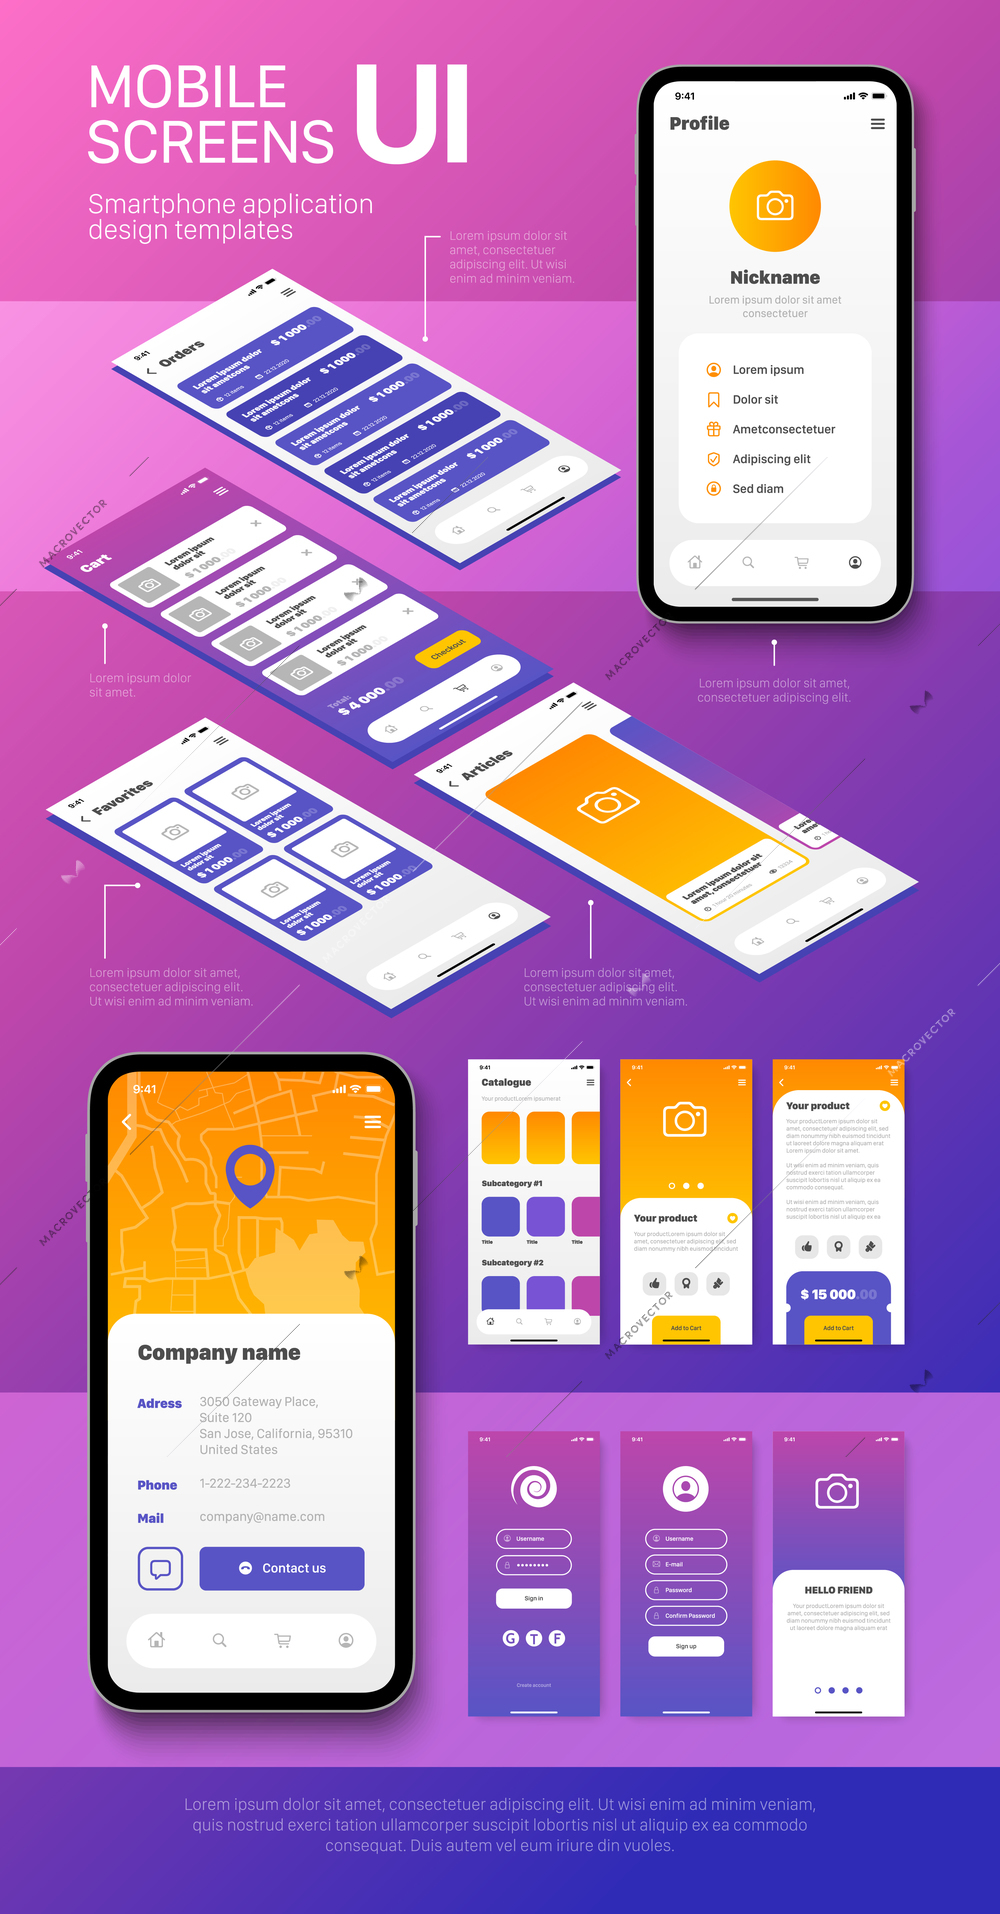 Flat vertical poster illustrated smartphone screens with design templates of user interfaces for mobile applications vector illustration